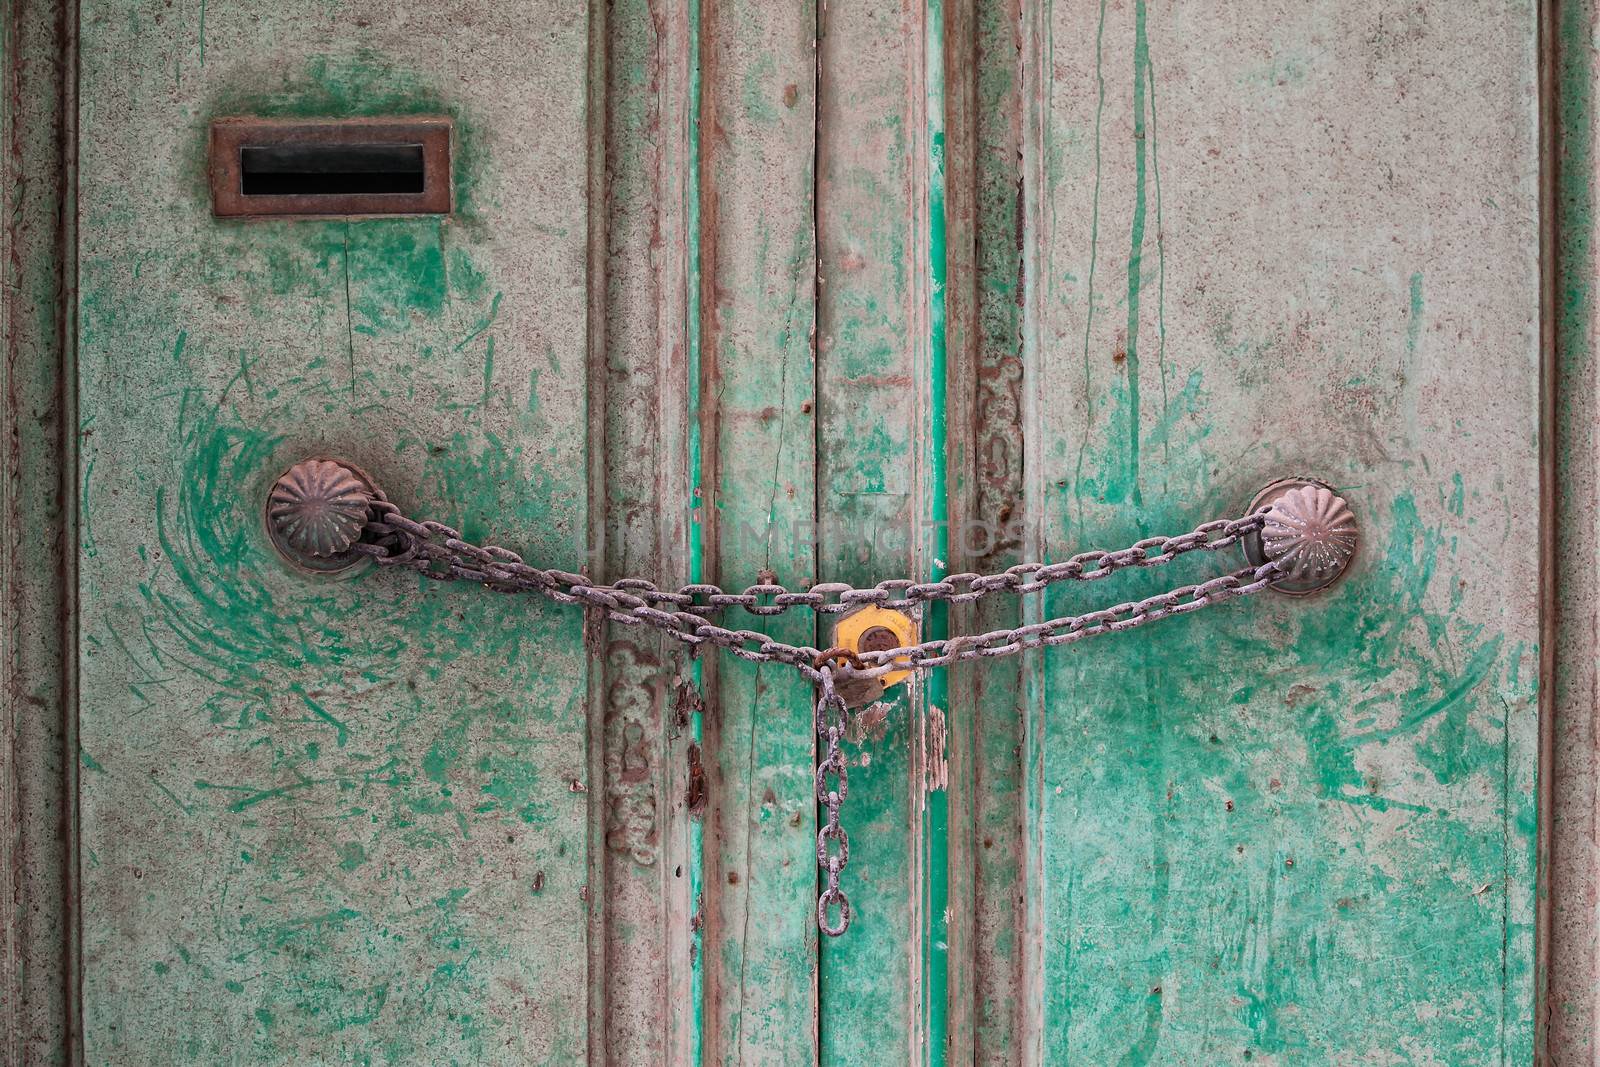 An old traditional door locked with chain and padlock.